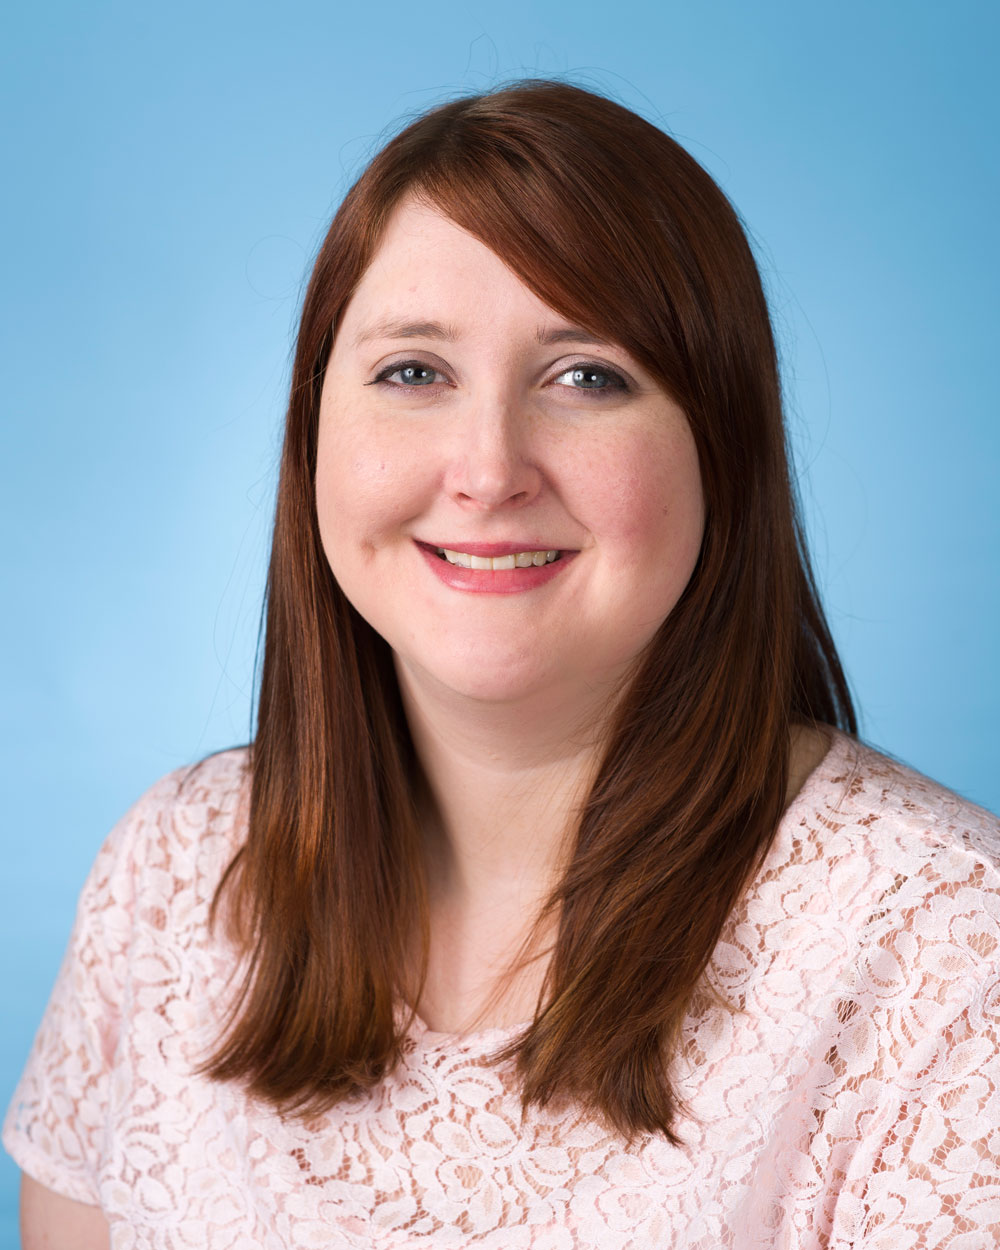 Certified Genetic Counselor Tracy Dawson, MS, CGC at Fort Sanders Perinatal Center helps parents learn about prenatal genetic testing and if a positive result means their baby is at risk for a birth defect.